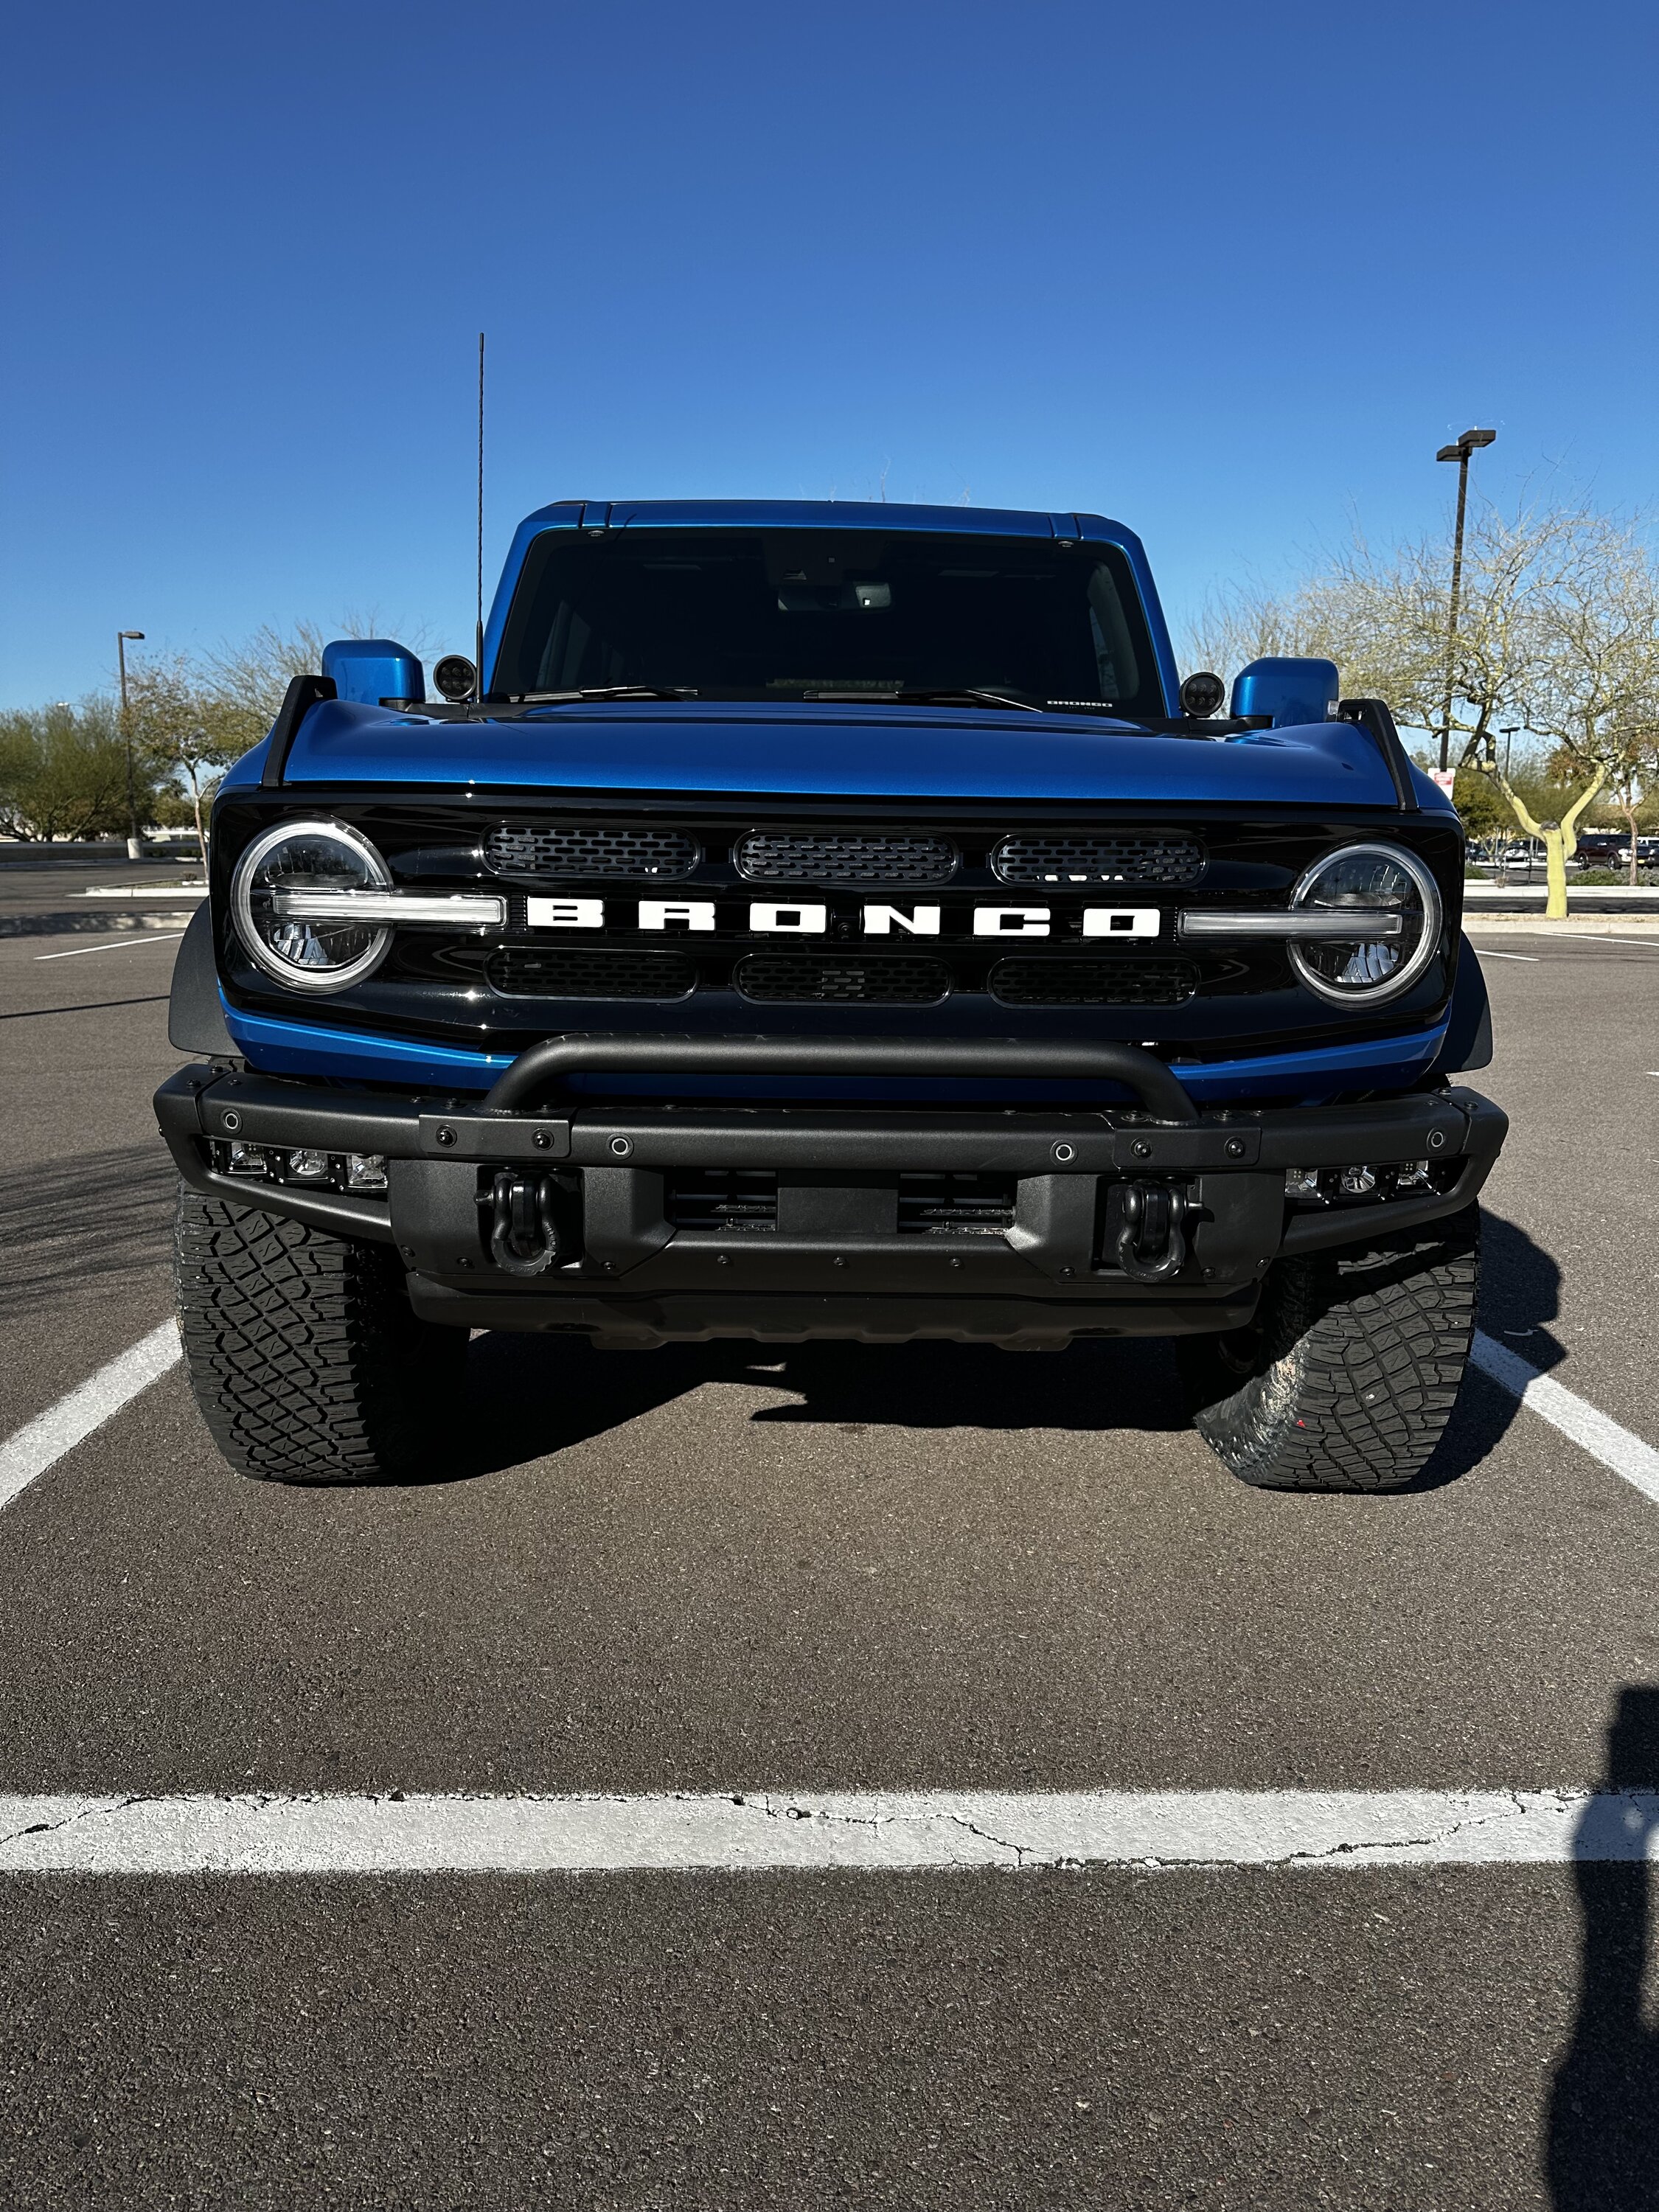 Ford Bronco Mesh grill inserts installed on Big Bend 28FEFA34-8588-4871-8FD5-47A155B17A0C